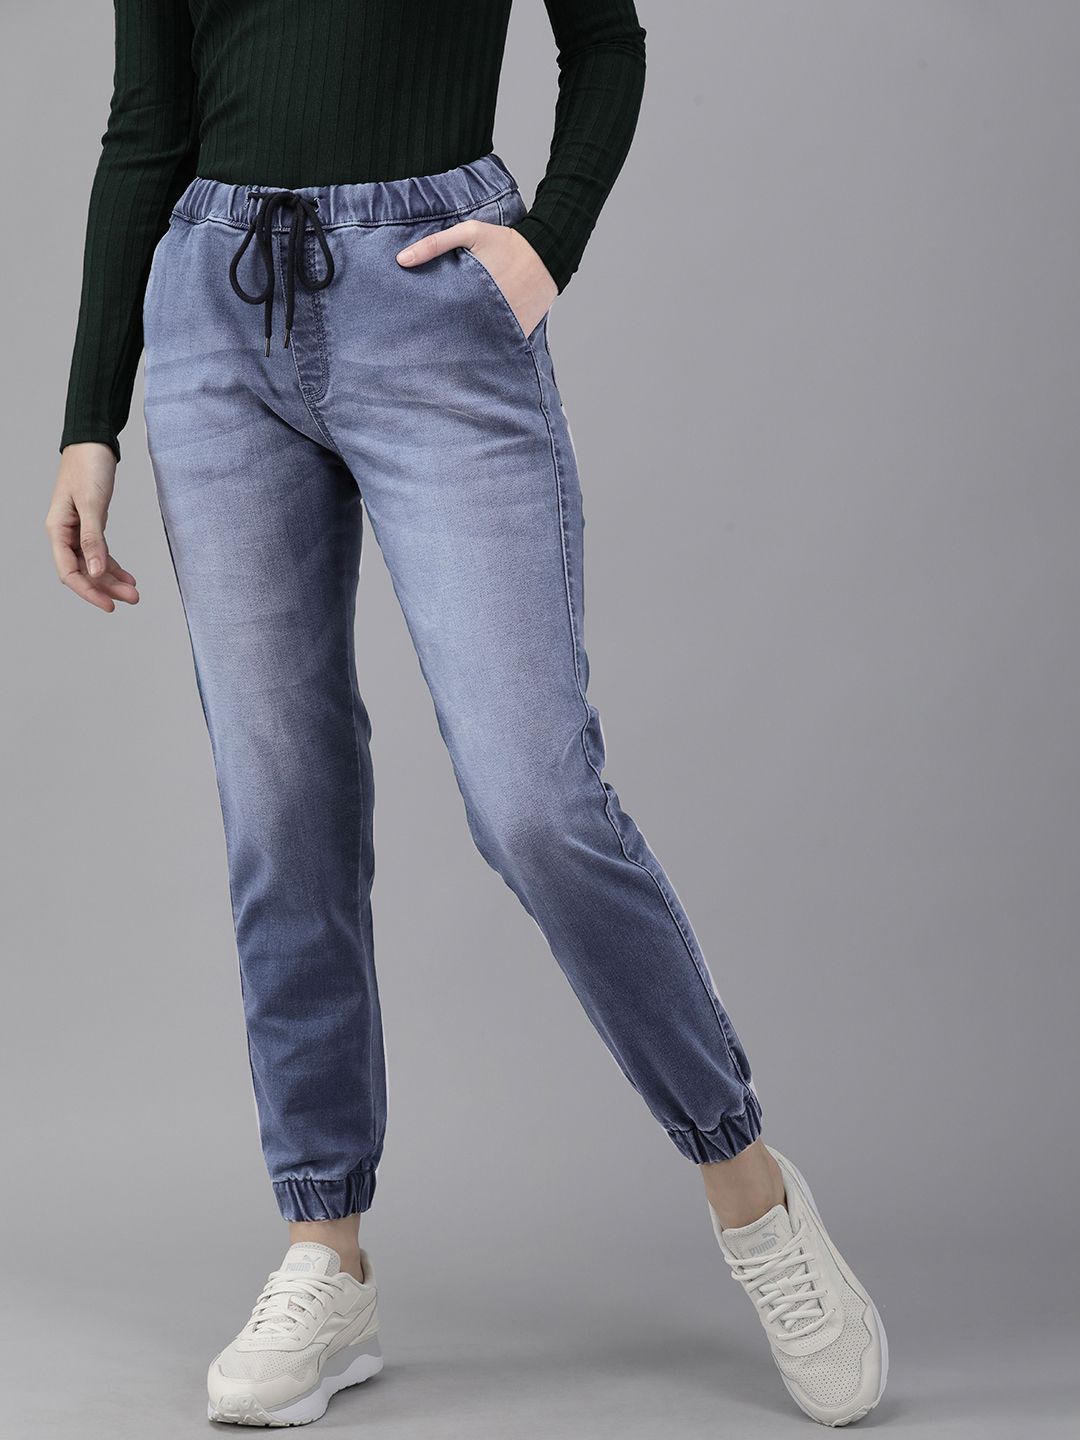 Roadster Women Blue Solid Light Fade Stretchable Jeans Price in India